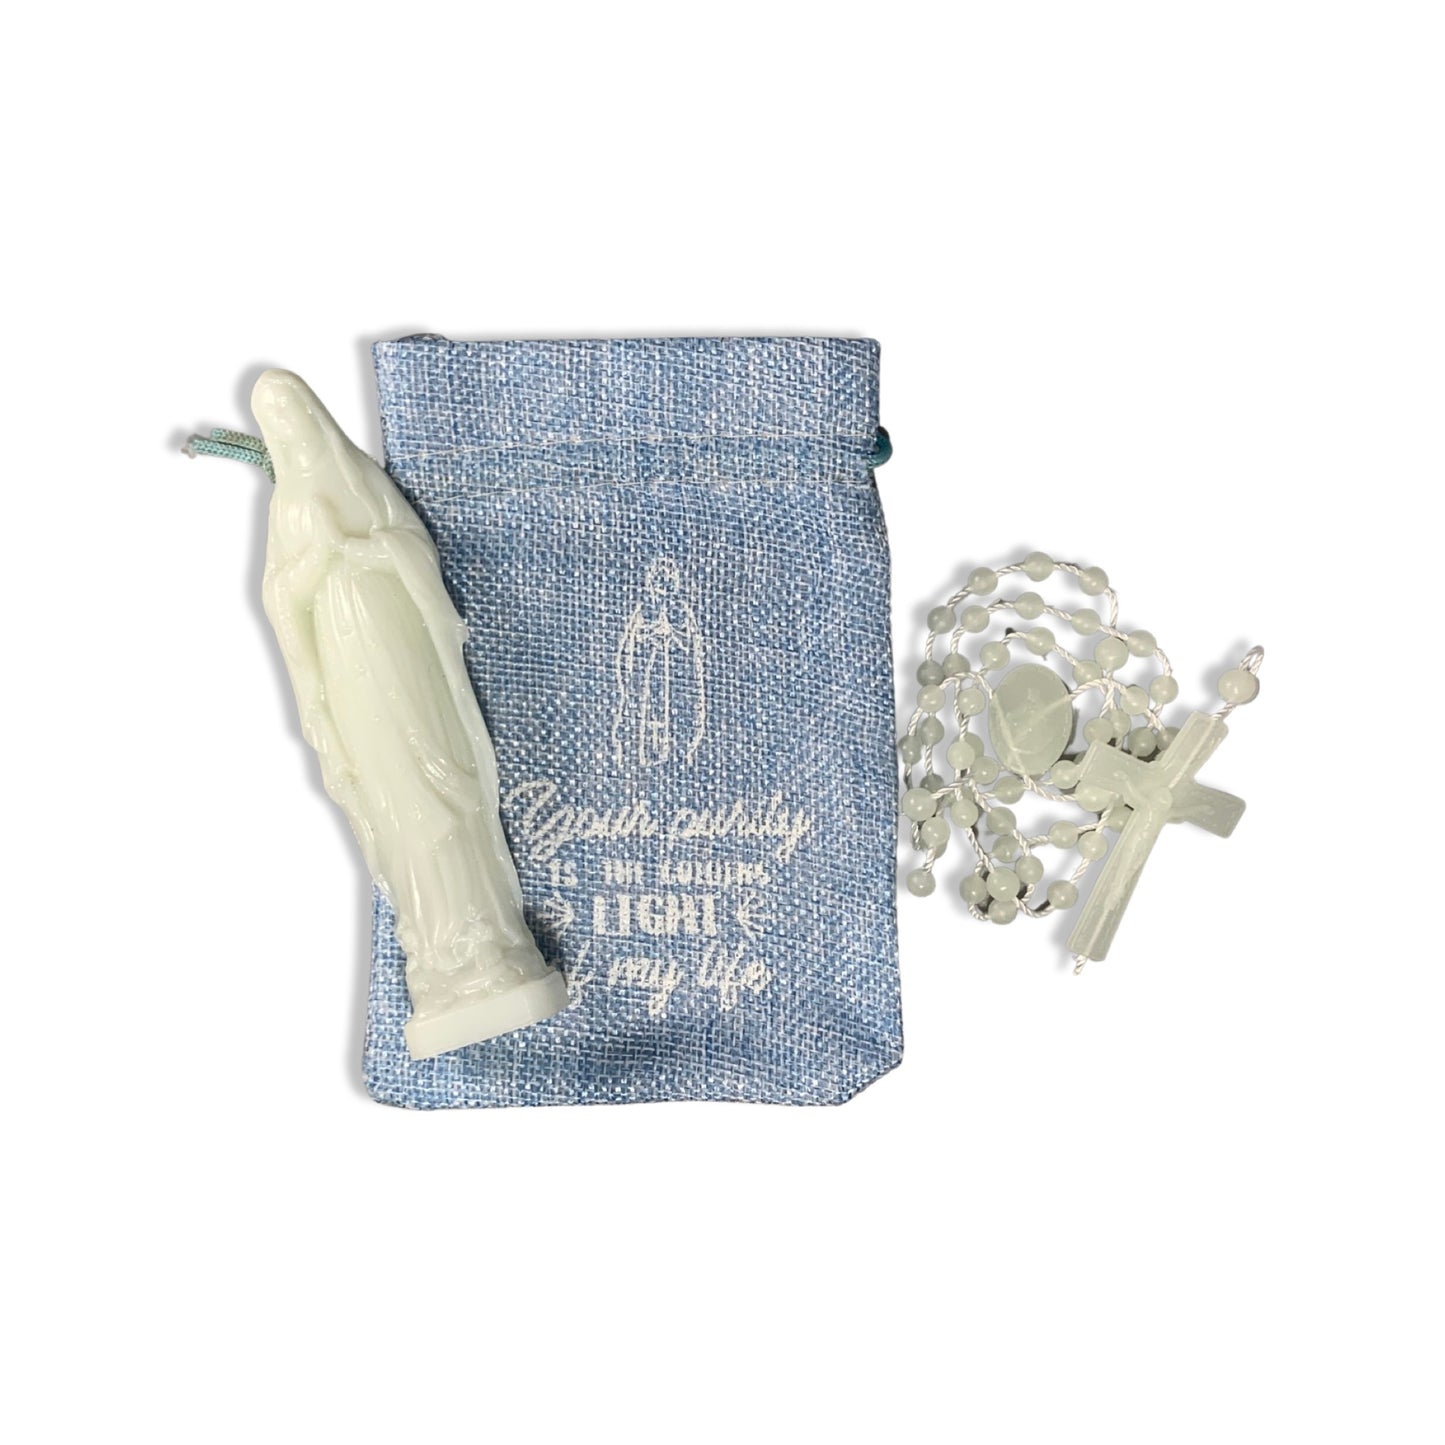 Glow in the Dark Lourdes Statue with Blue Pouch and Rosary